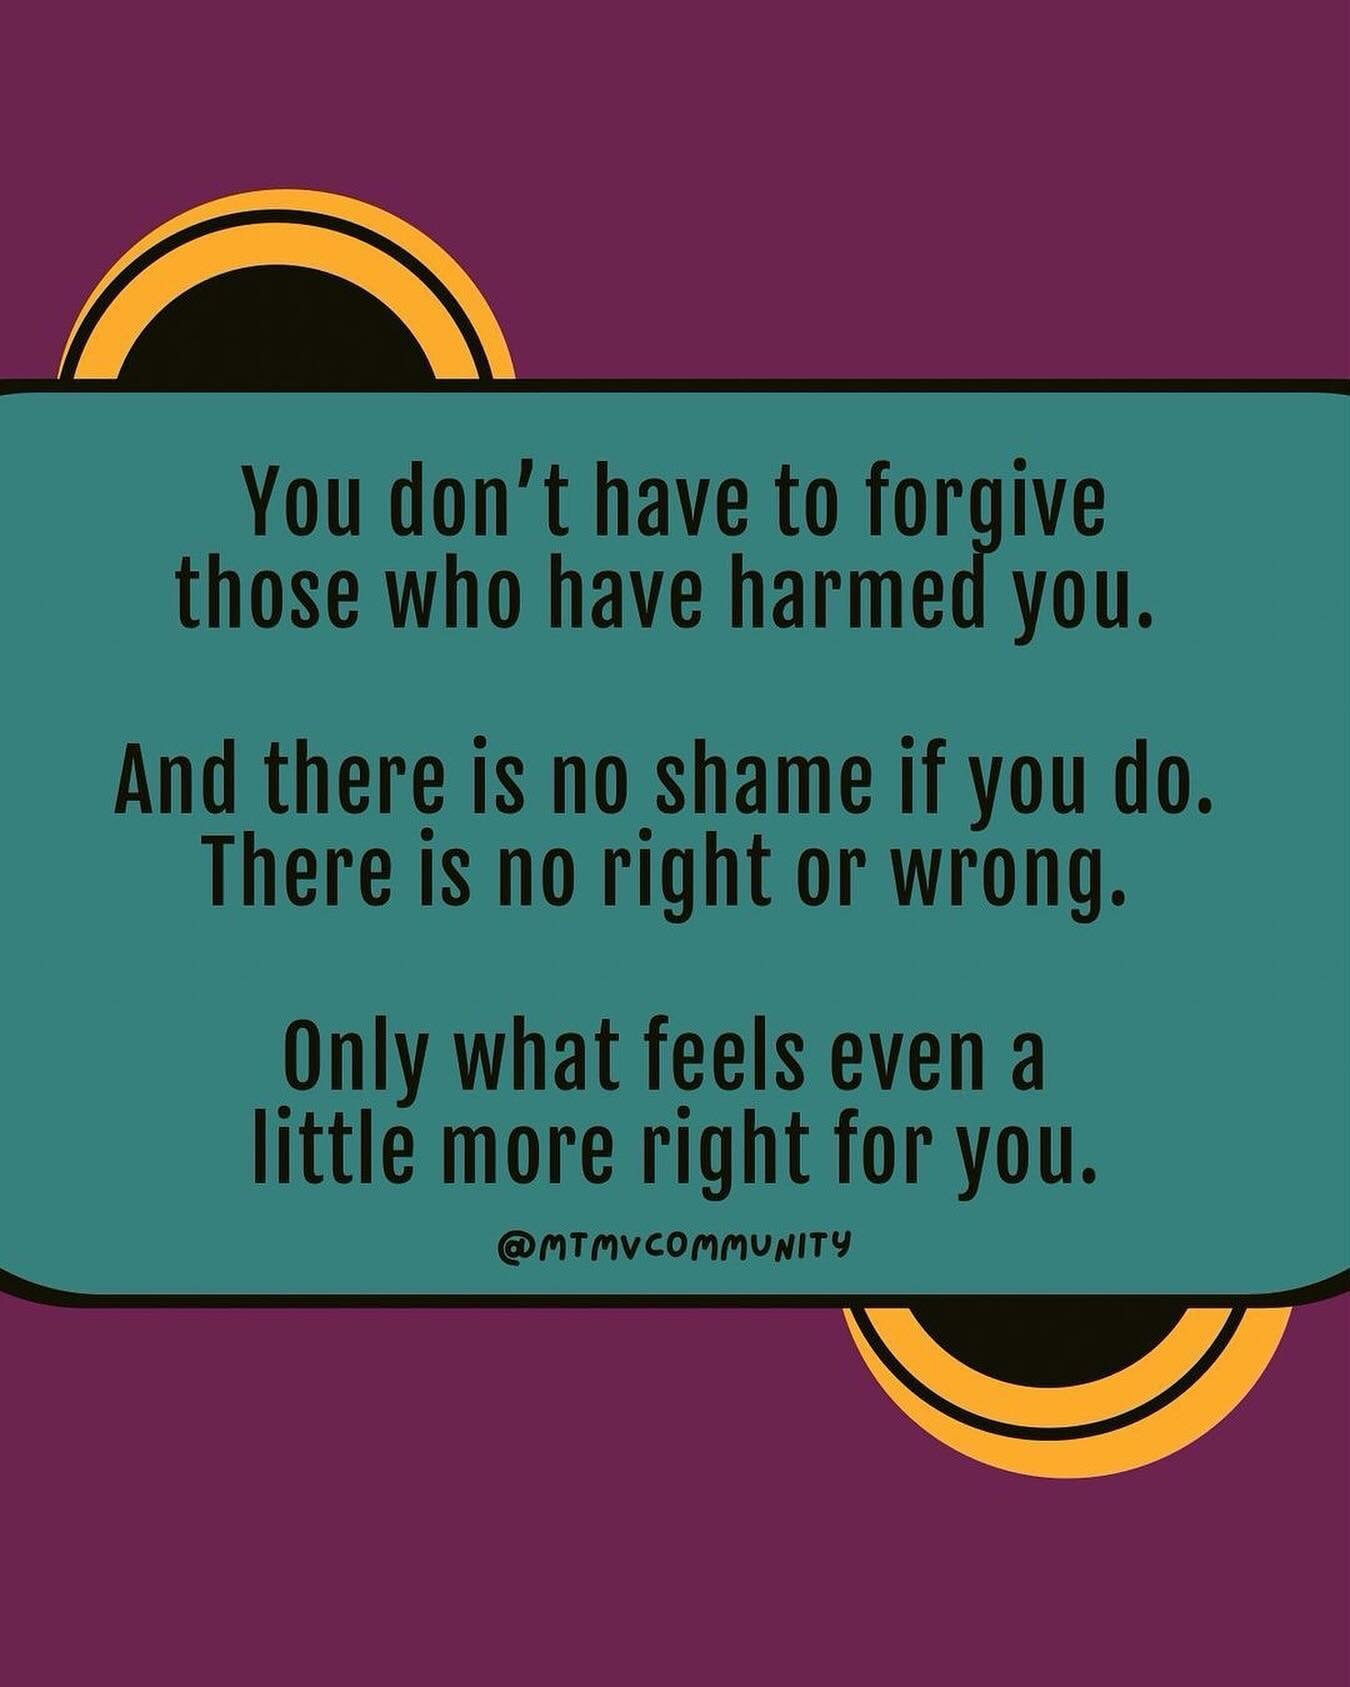 You do not have to forgive in order to heal or move forward. You unfortunately did not get a choice in what happened but you get to choose if you want to forgive or not. 

[Image description: A turquoise box in front of a purple background with yello